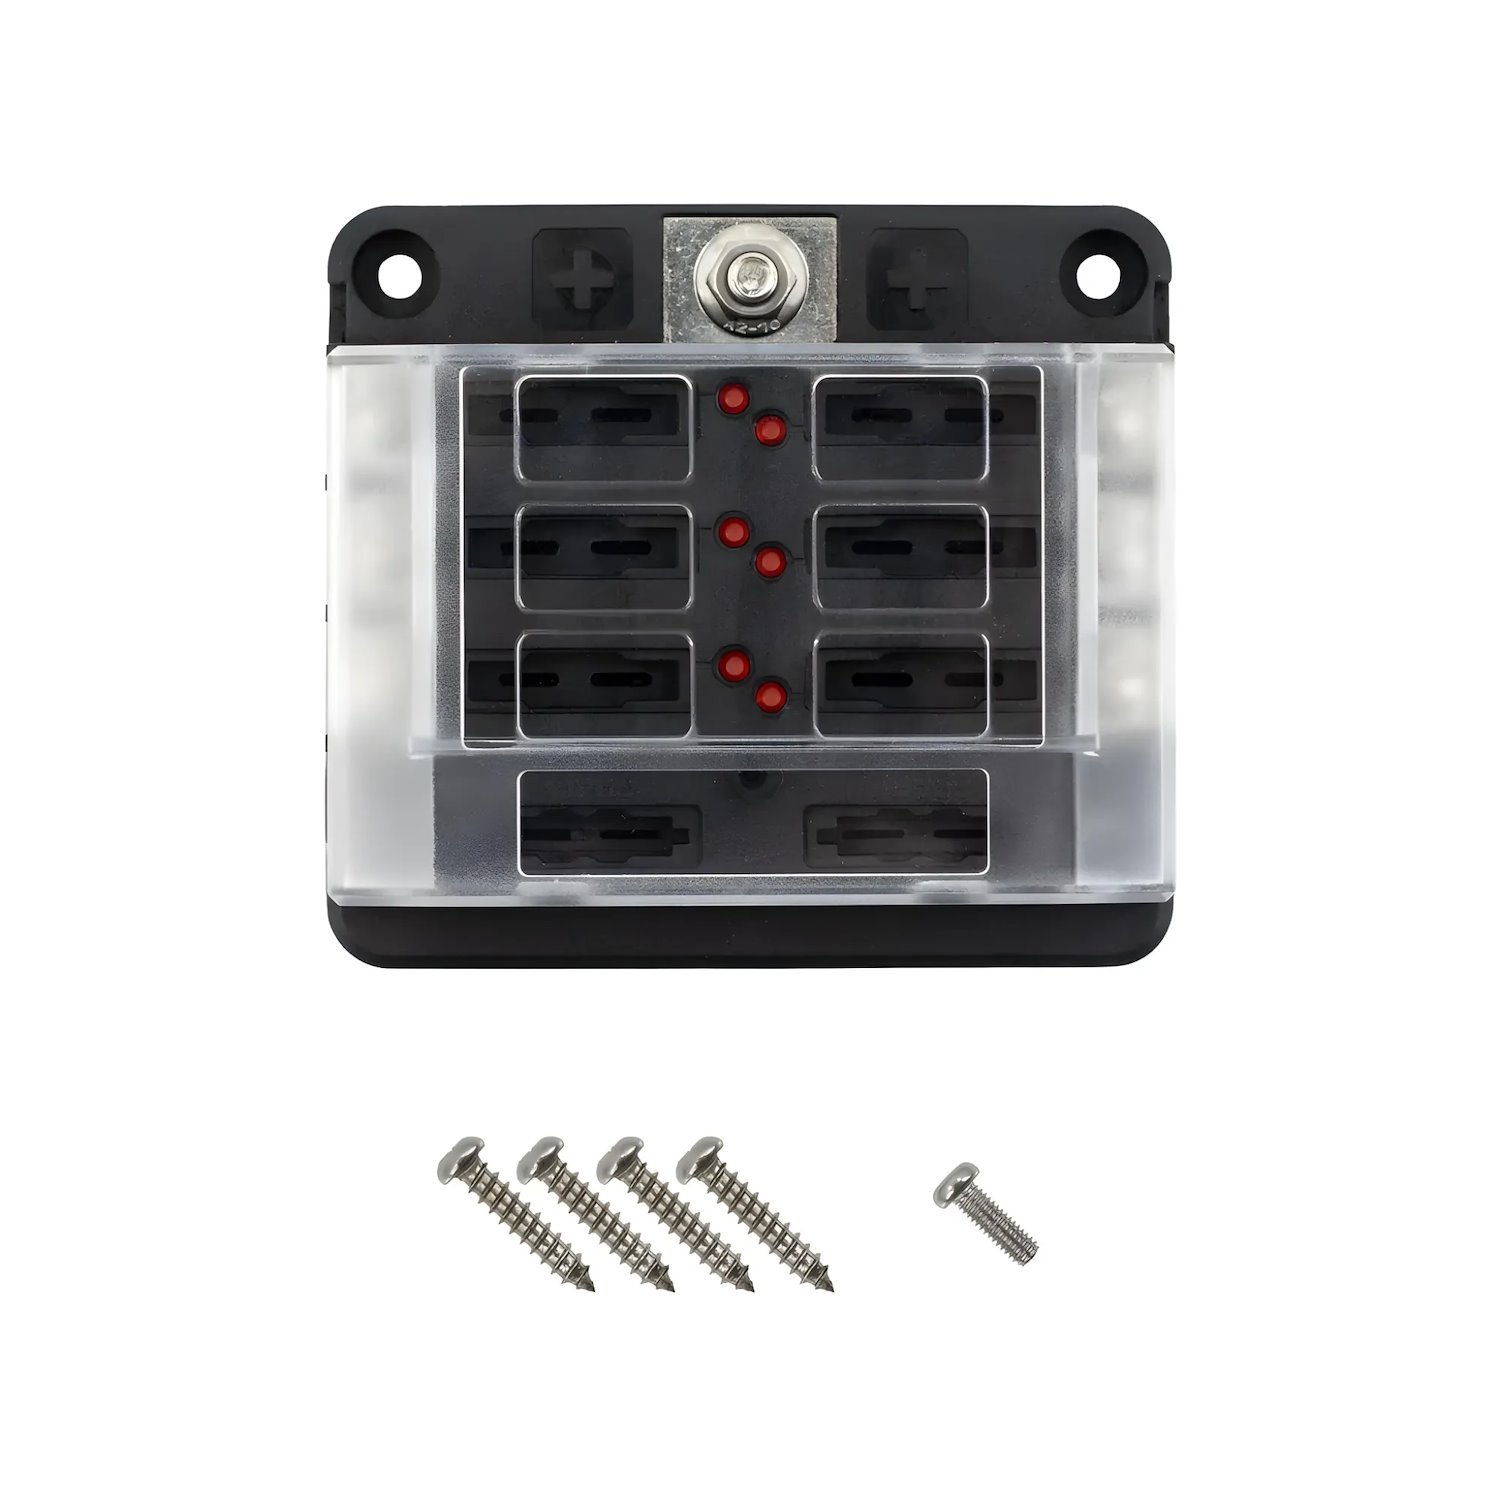 12-82025 EGIS Mobile Electric 8028B, RT Fuse Block 6-Way, ATO/ATC, w/LED Indication & Clear Cover